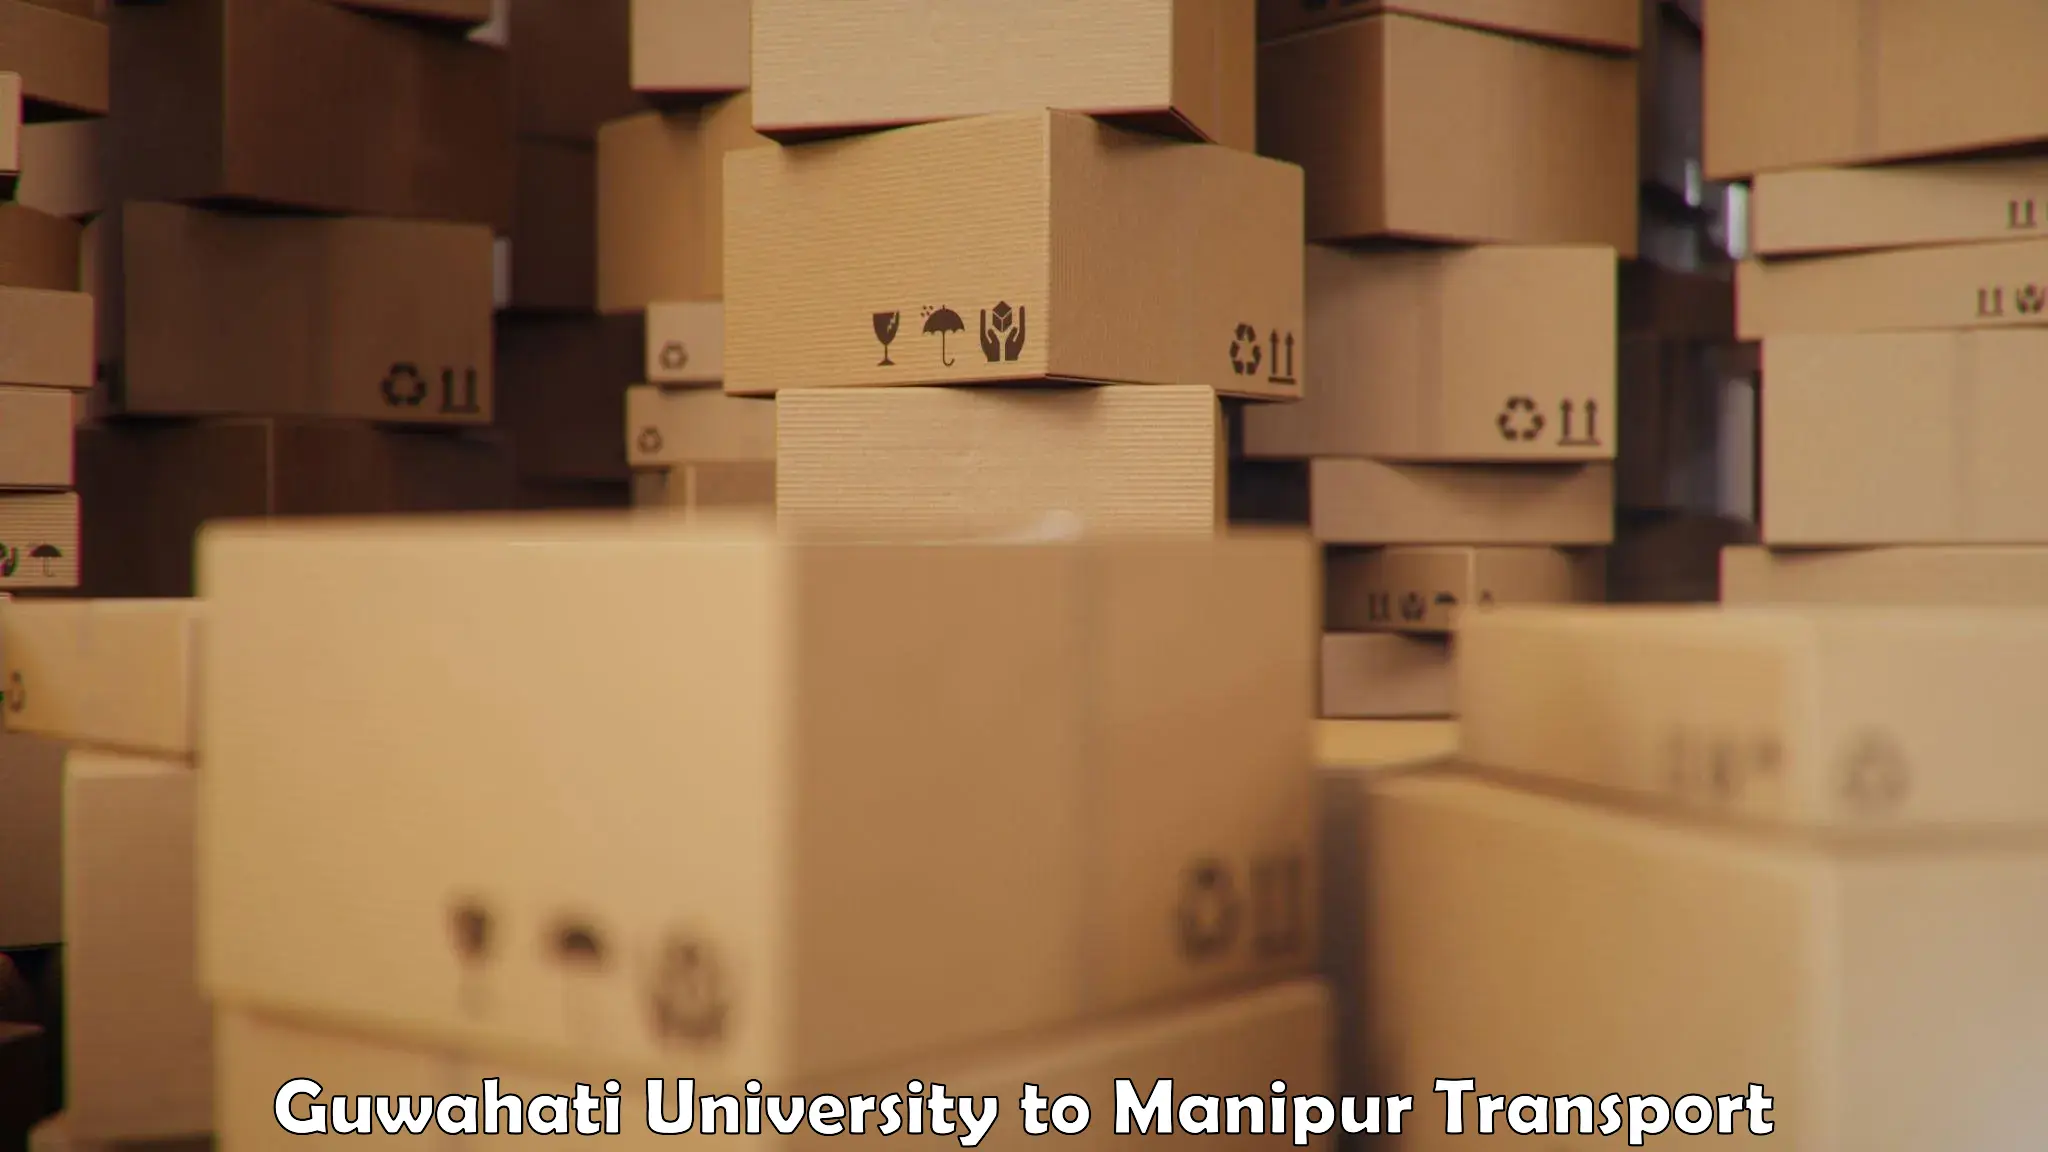 Part load transport service in India Guwahati University to Manipur